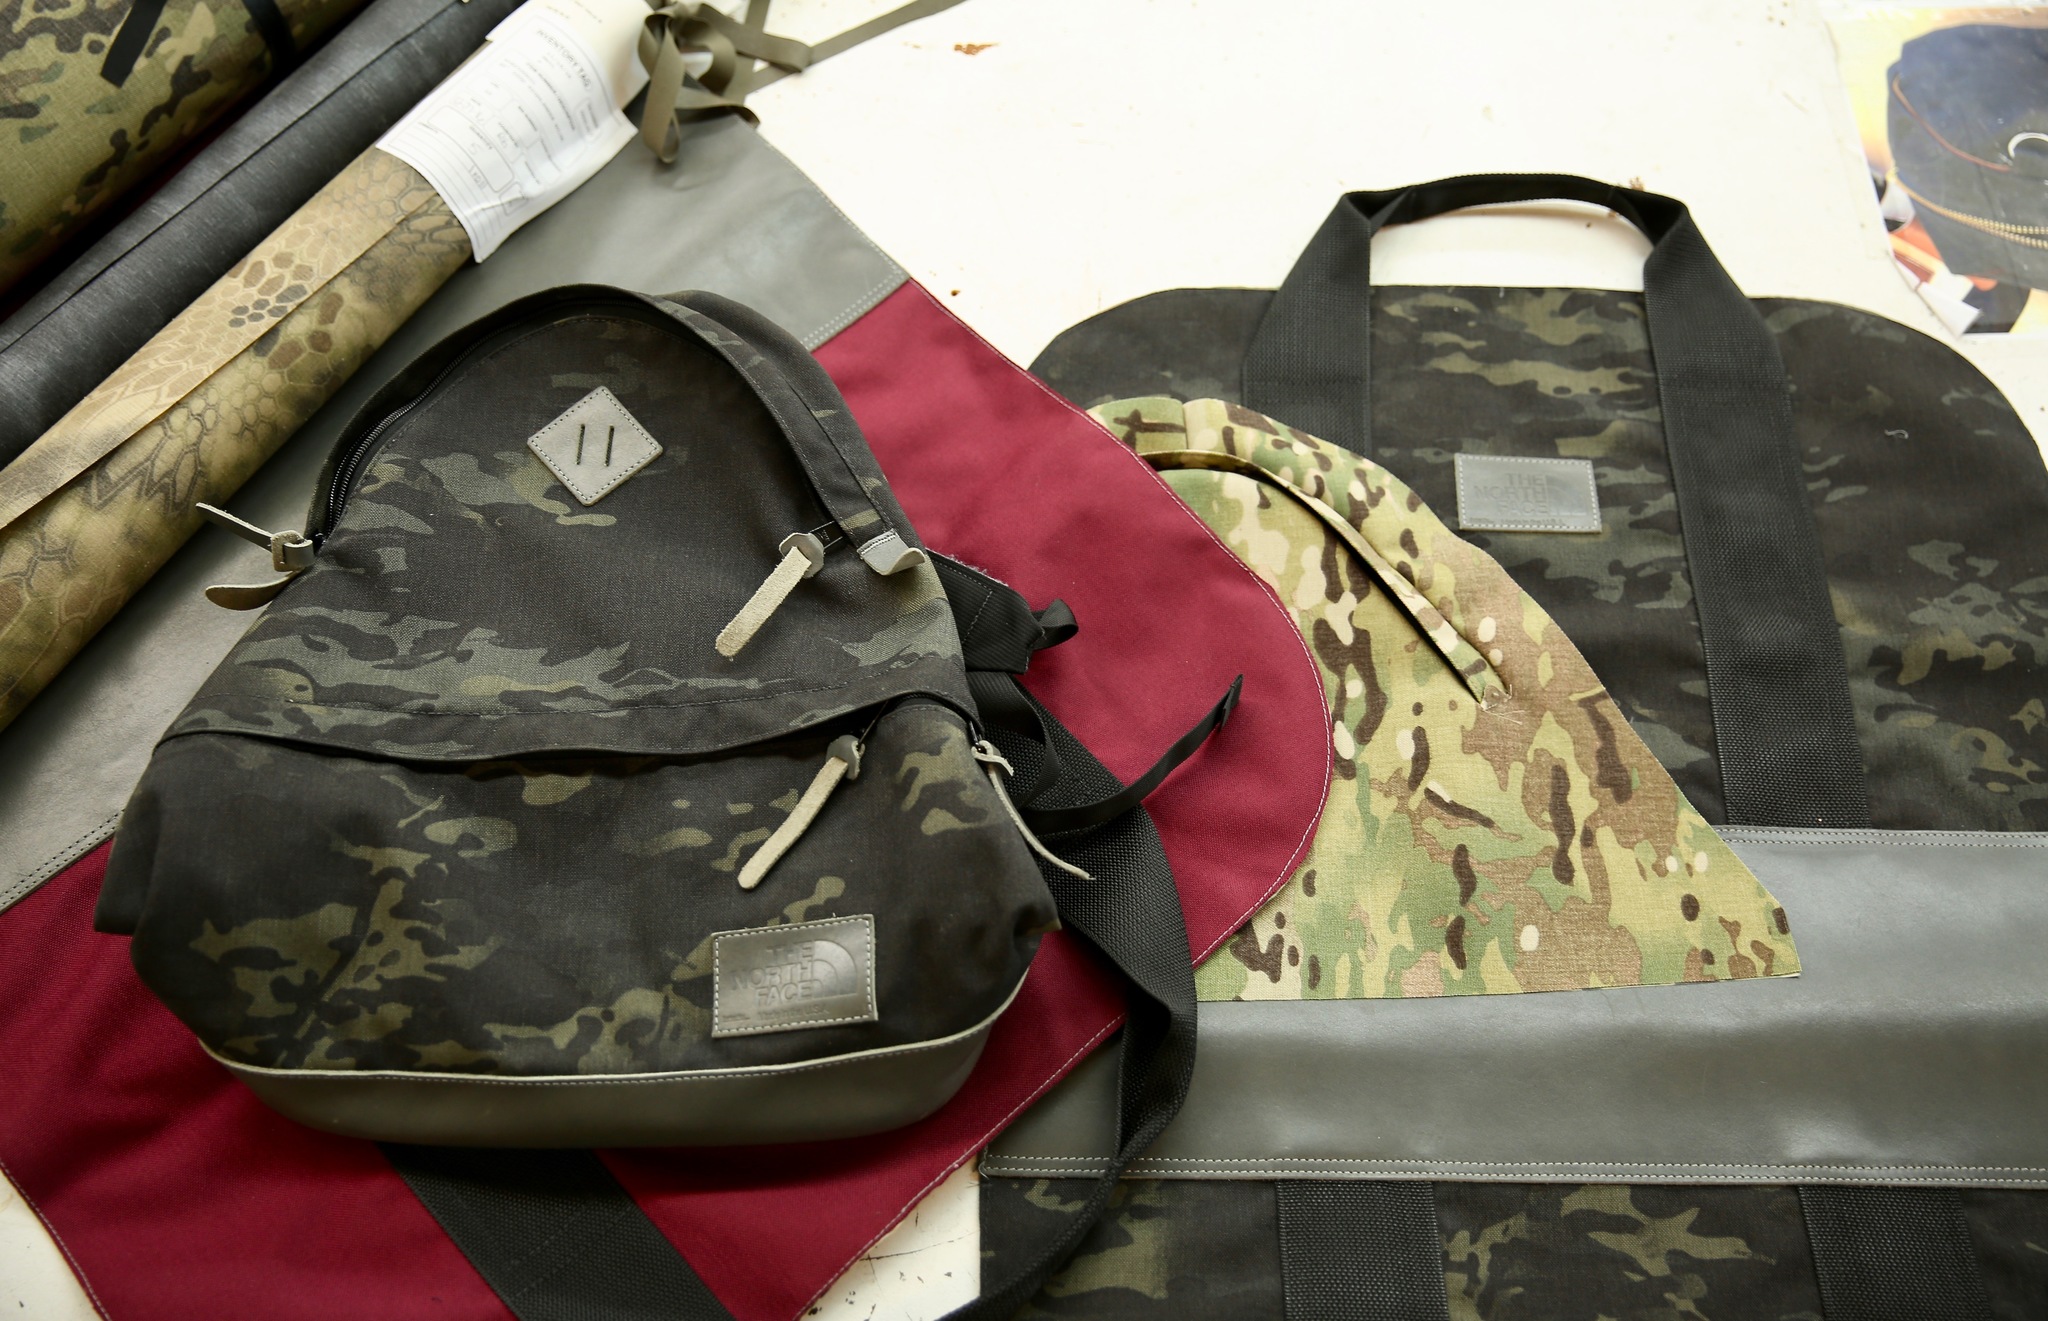 Cordura and The North Face recreate vintage packs